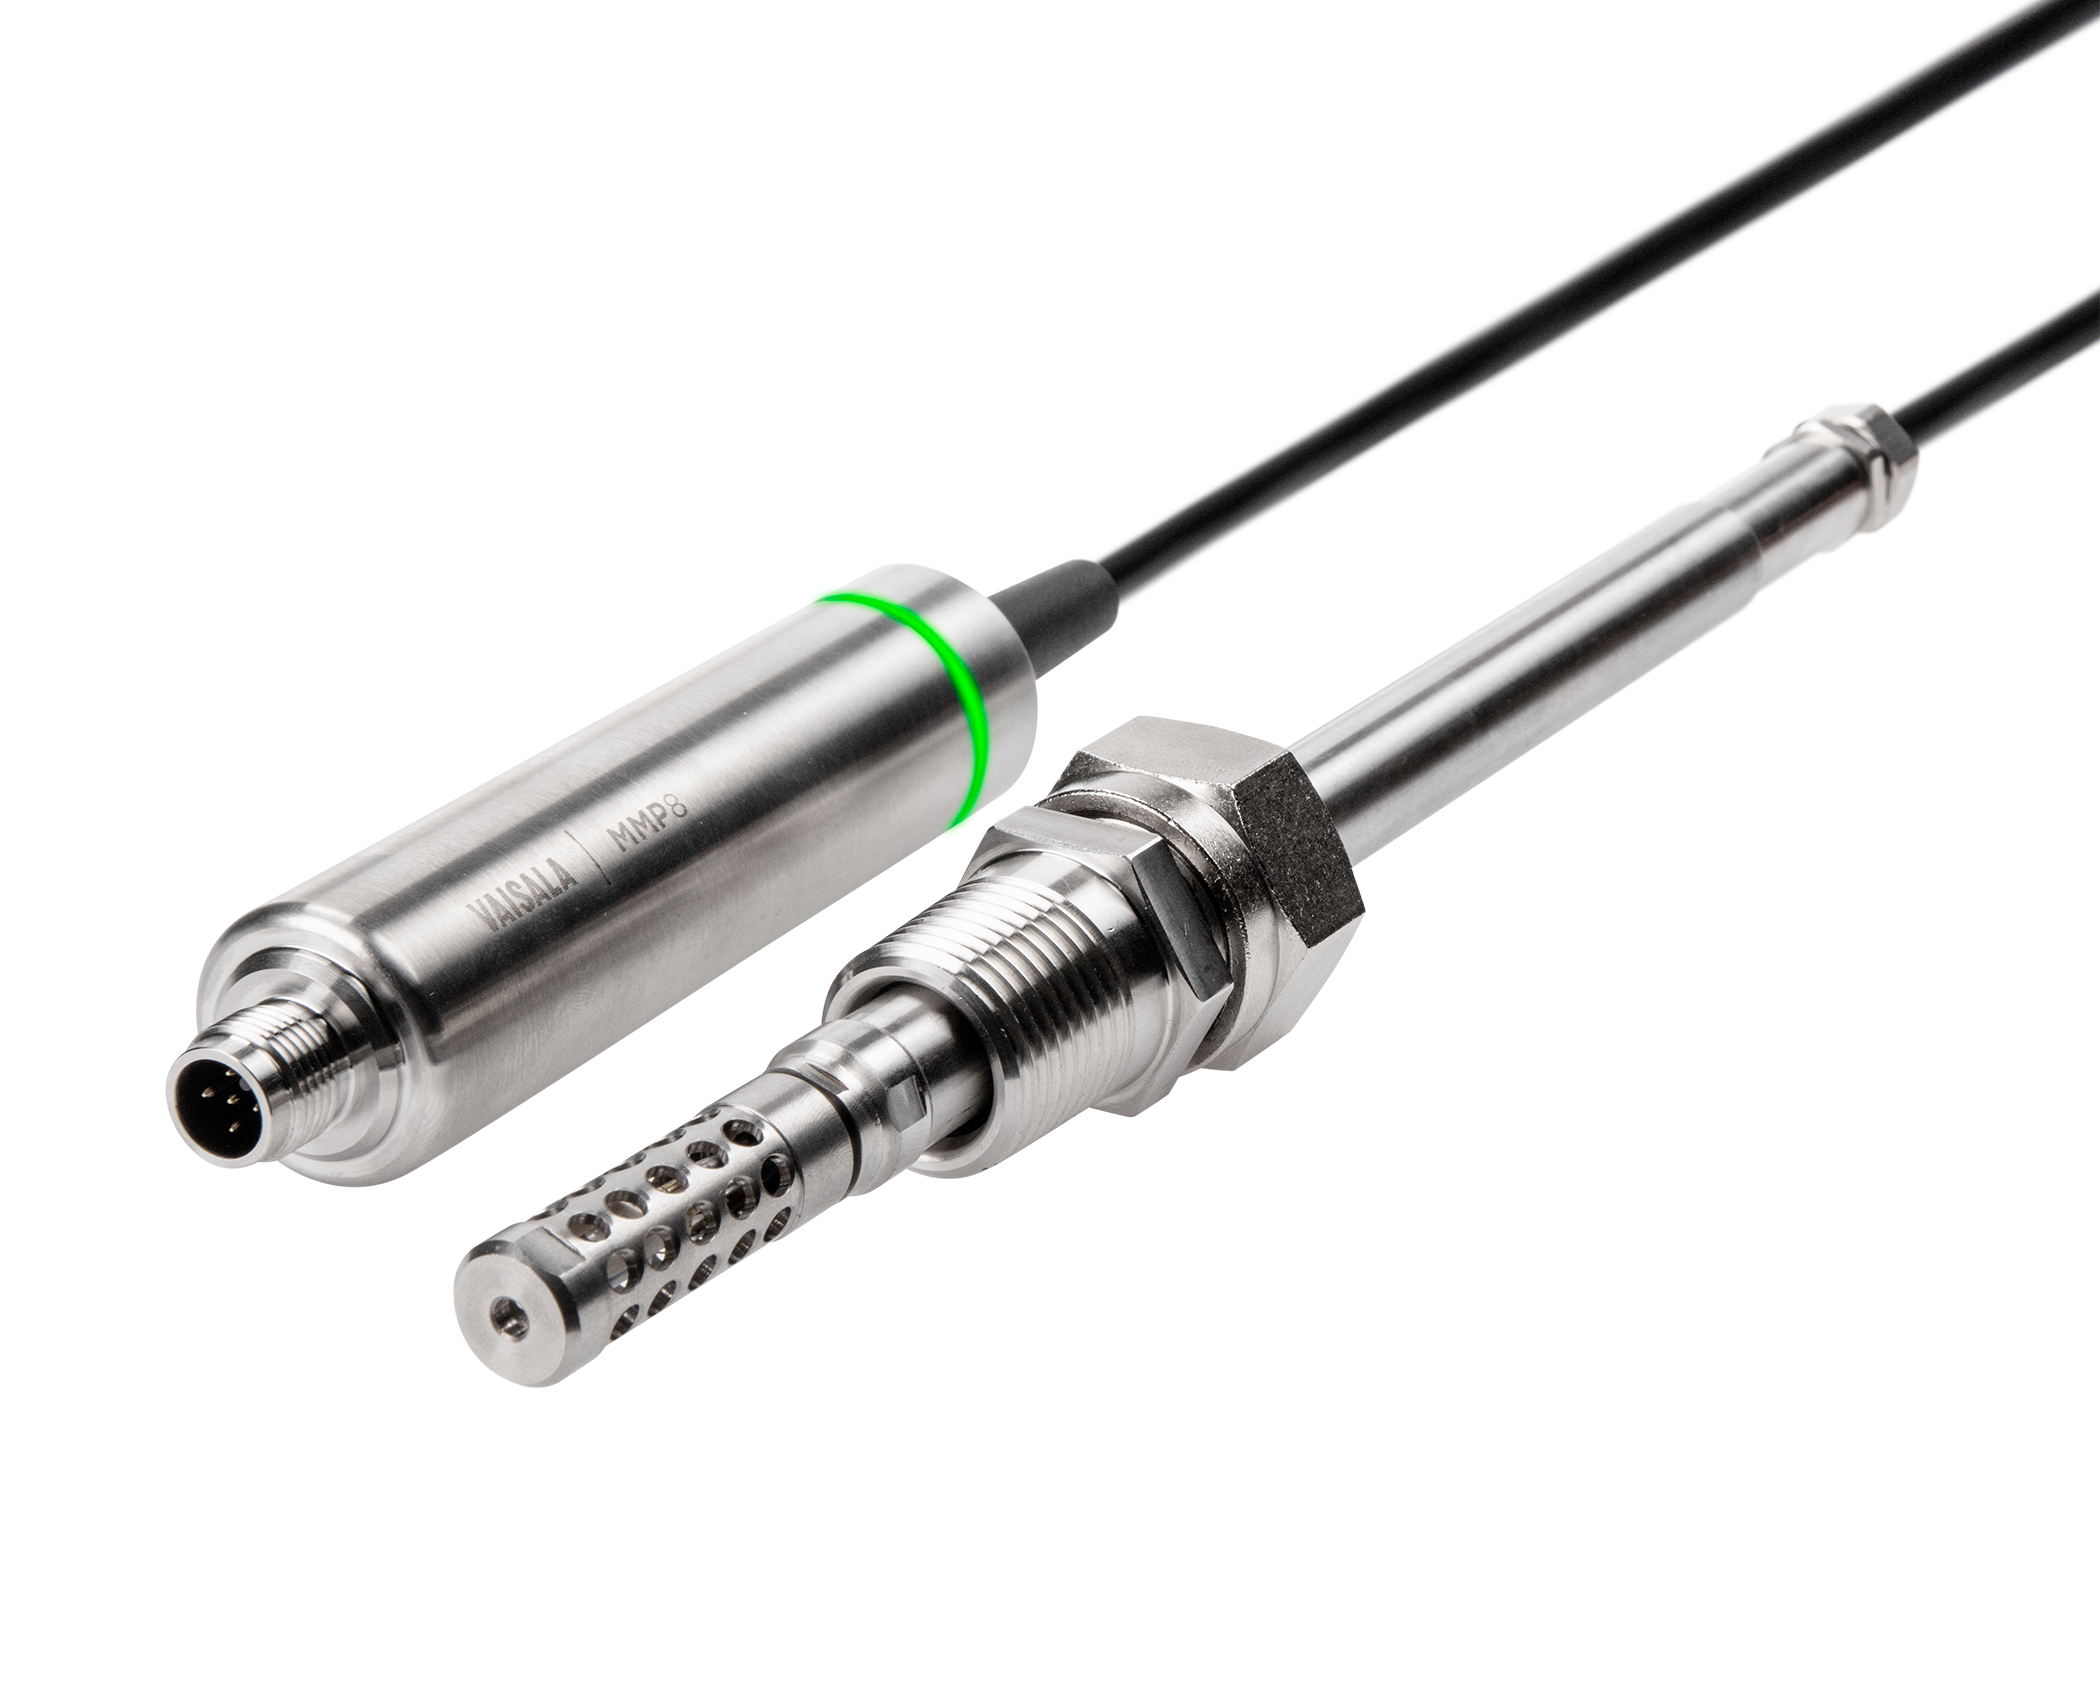 Moisture in Oil Probe MMP8 is available at Industrie Automation Graz, IAG, throughout Austria.